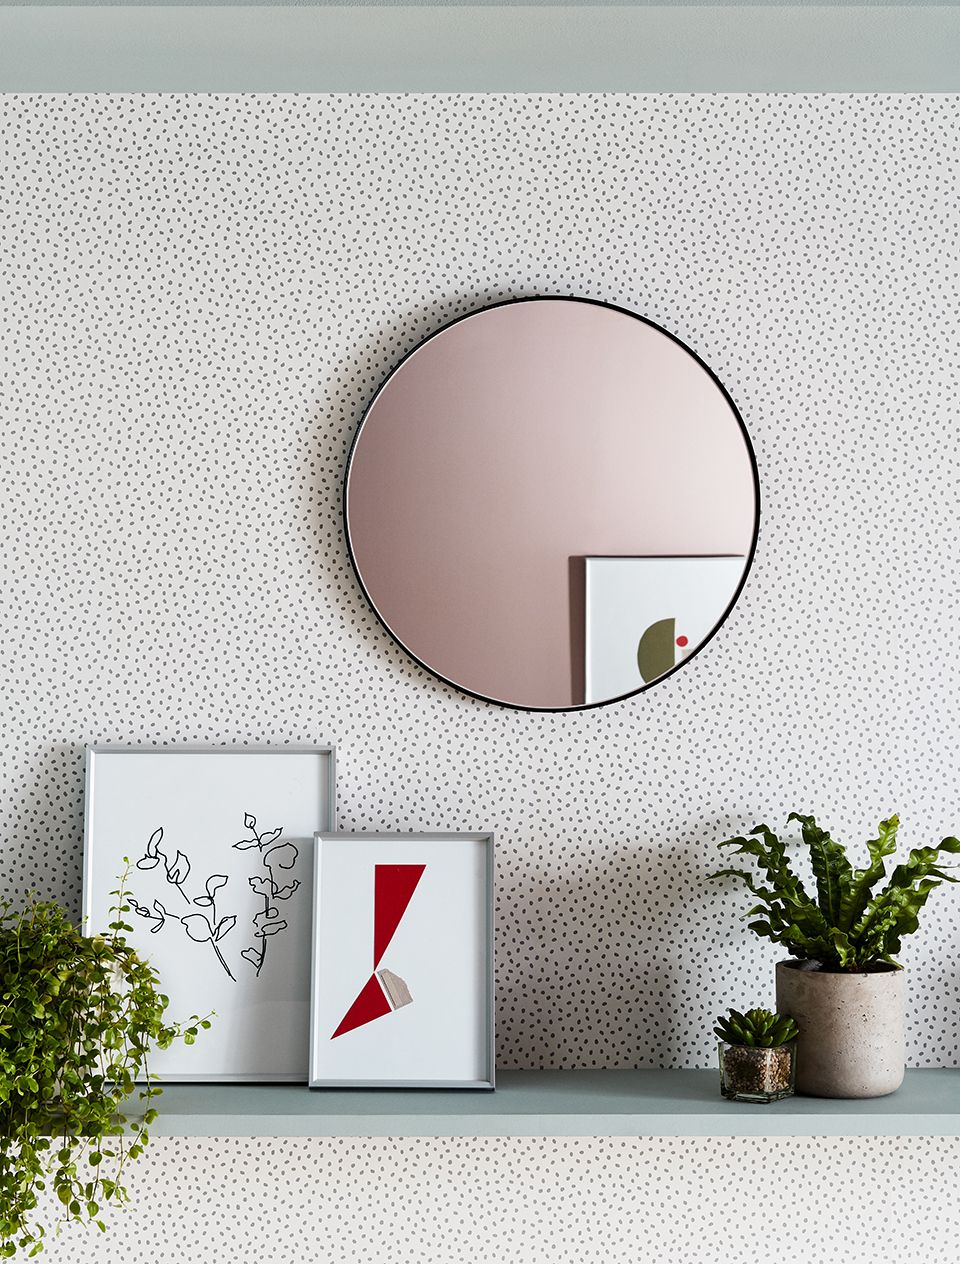 Feature wallpaper with round mirror